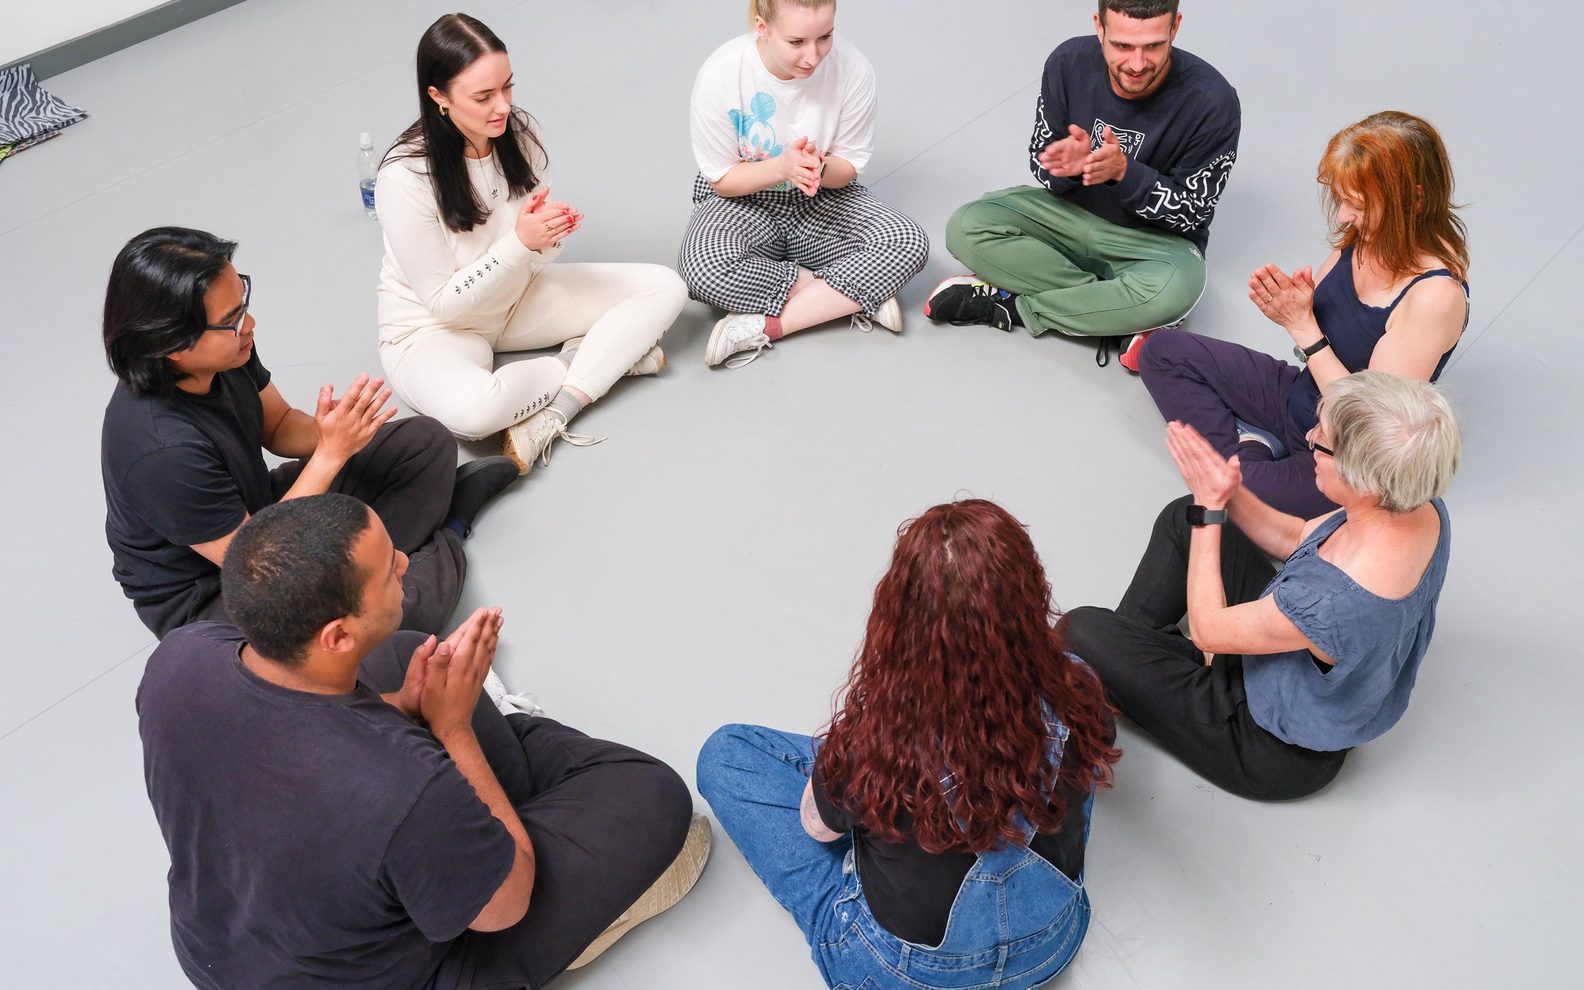 A group of people sit in circle with their hands together, as if in prayer.